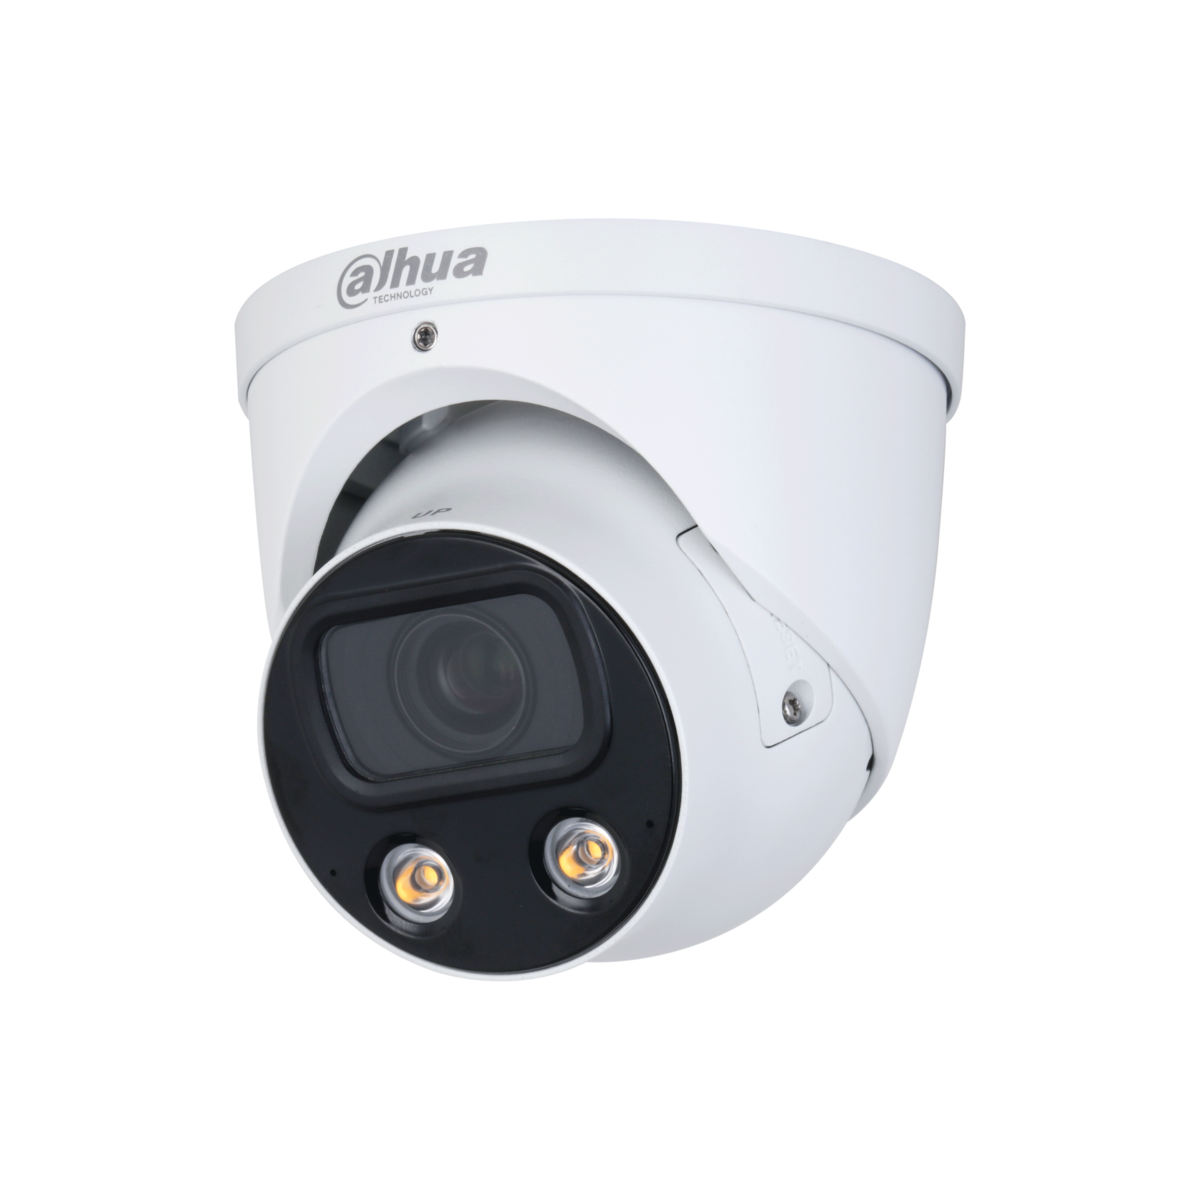 WIZMIND SERIES IP CAMERA WHITE AI PEOPLE COUNT 8MP/4K H.264/4+/5/5+ TURRET 140 TRUE WDR METAL 2.8MM FIXED LENS STARLIGHT WARM LED 60M EPOE IP67 BUILT IN MIC AUDIO IN AUDIO OUT 1 x ALARM IN 1 x ALARM OUT SUPPORT UP TO 256GB SD 12VDC